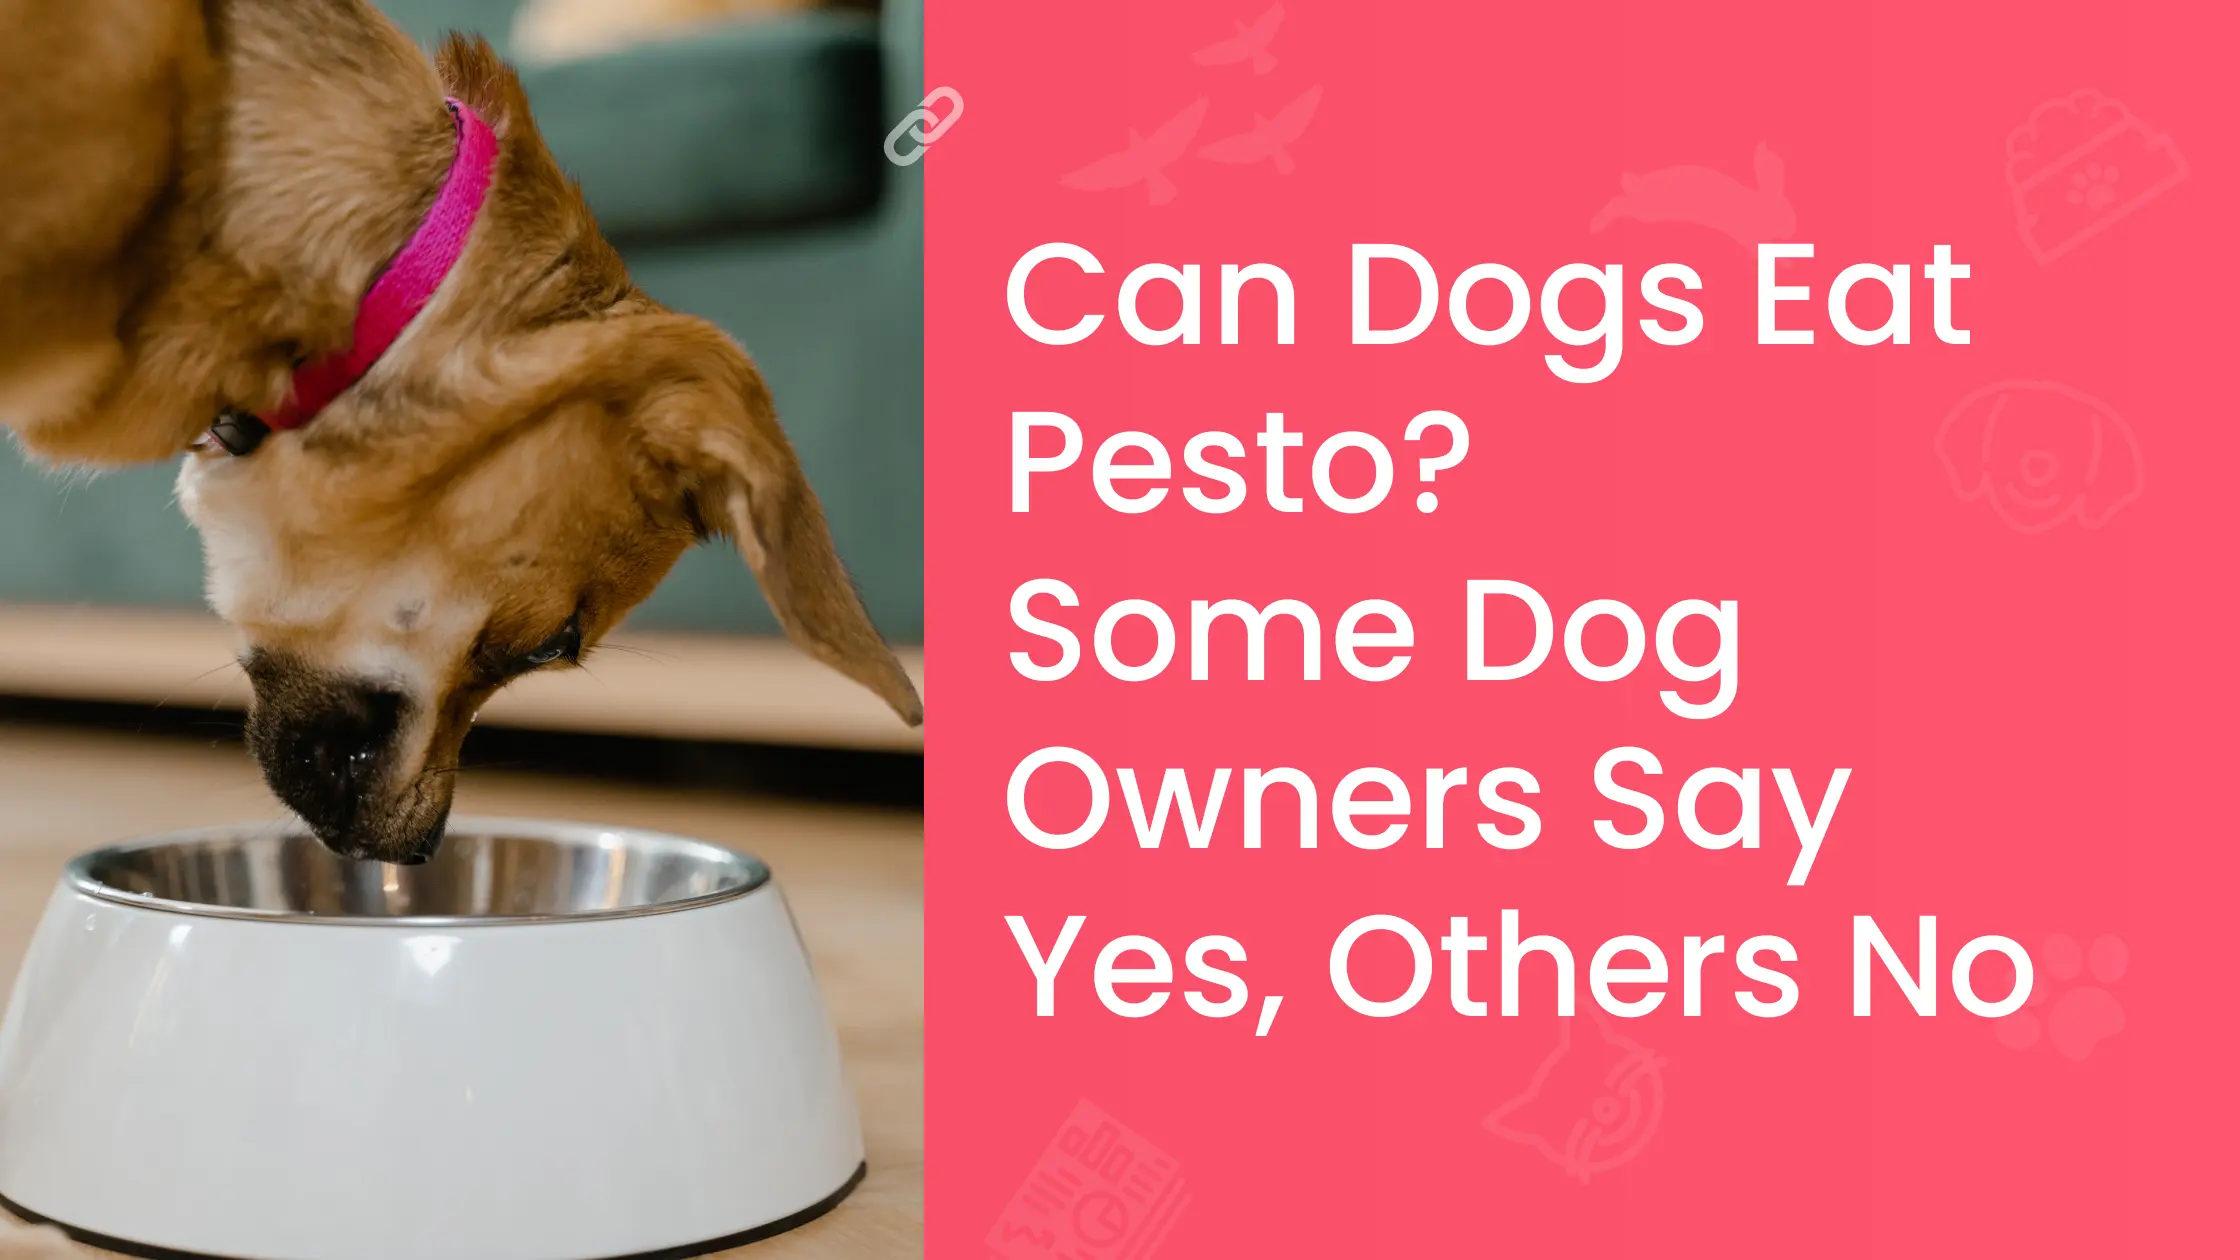 Can Dogs Eat Pesto Some Dog Owners Say Yes Others No